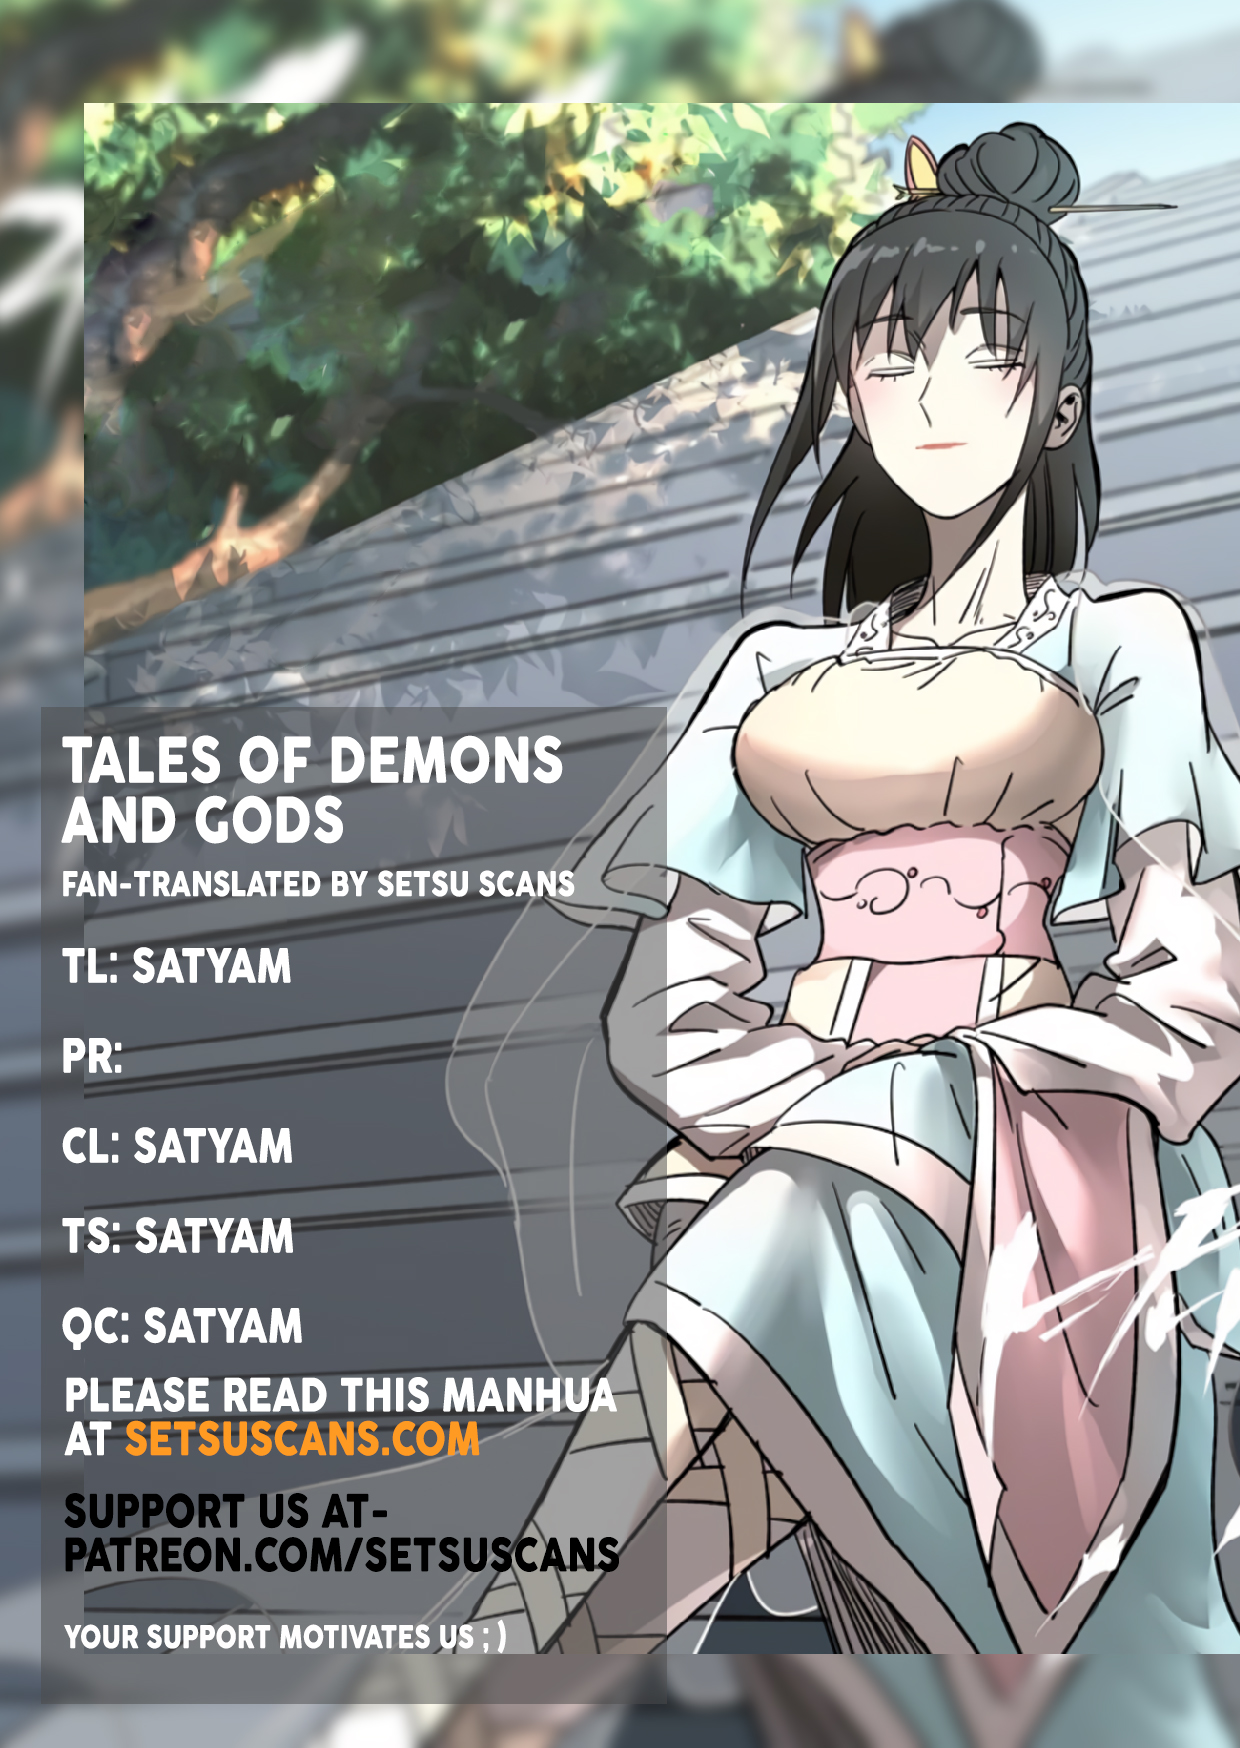 Tales of Demons and Gods - Chapter 28418 - Capturing Nie Li (2) - Image 1